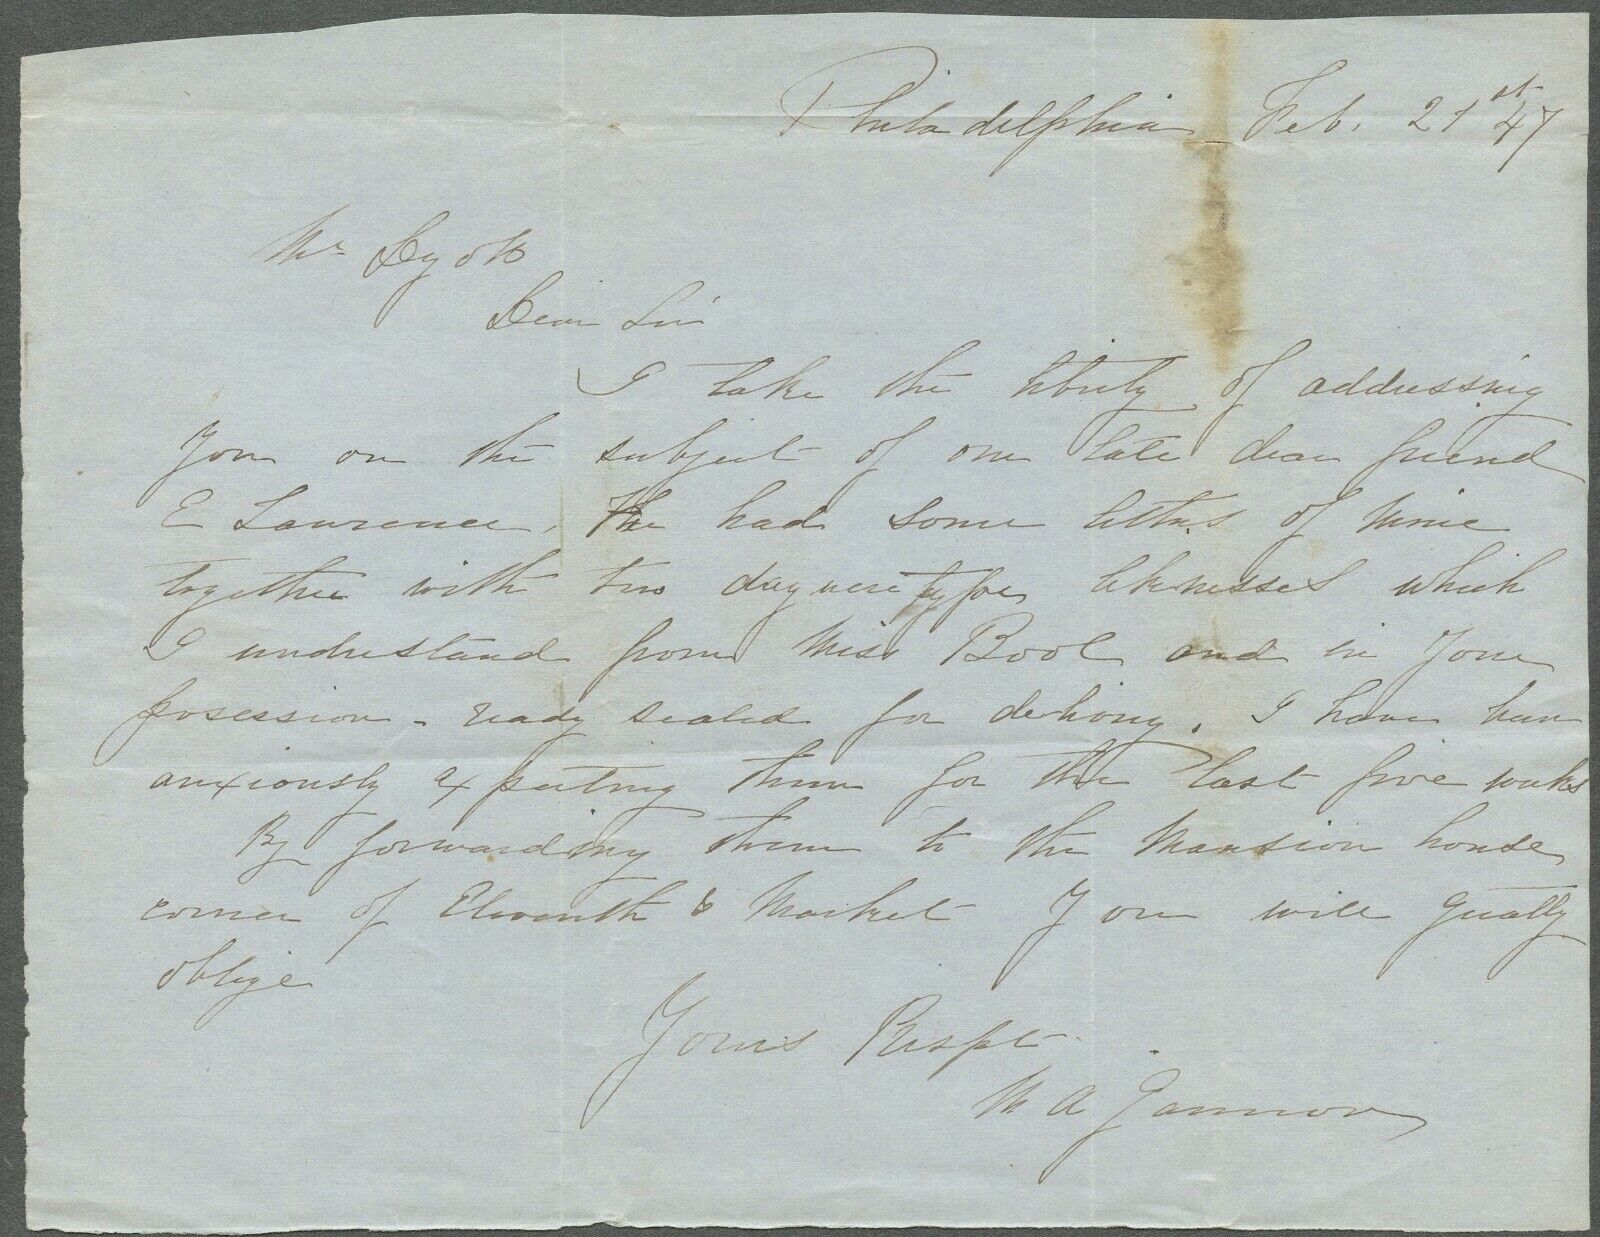 MYSTERY FINANCIAL DOCUMENT - 1847